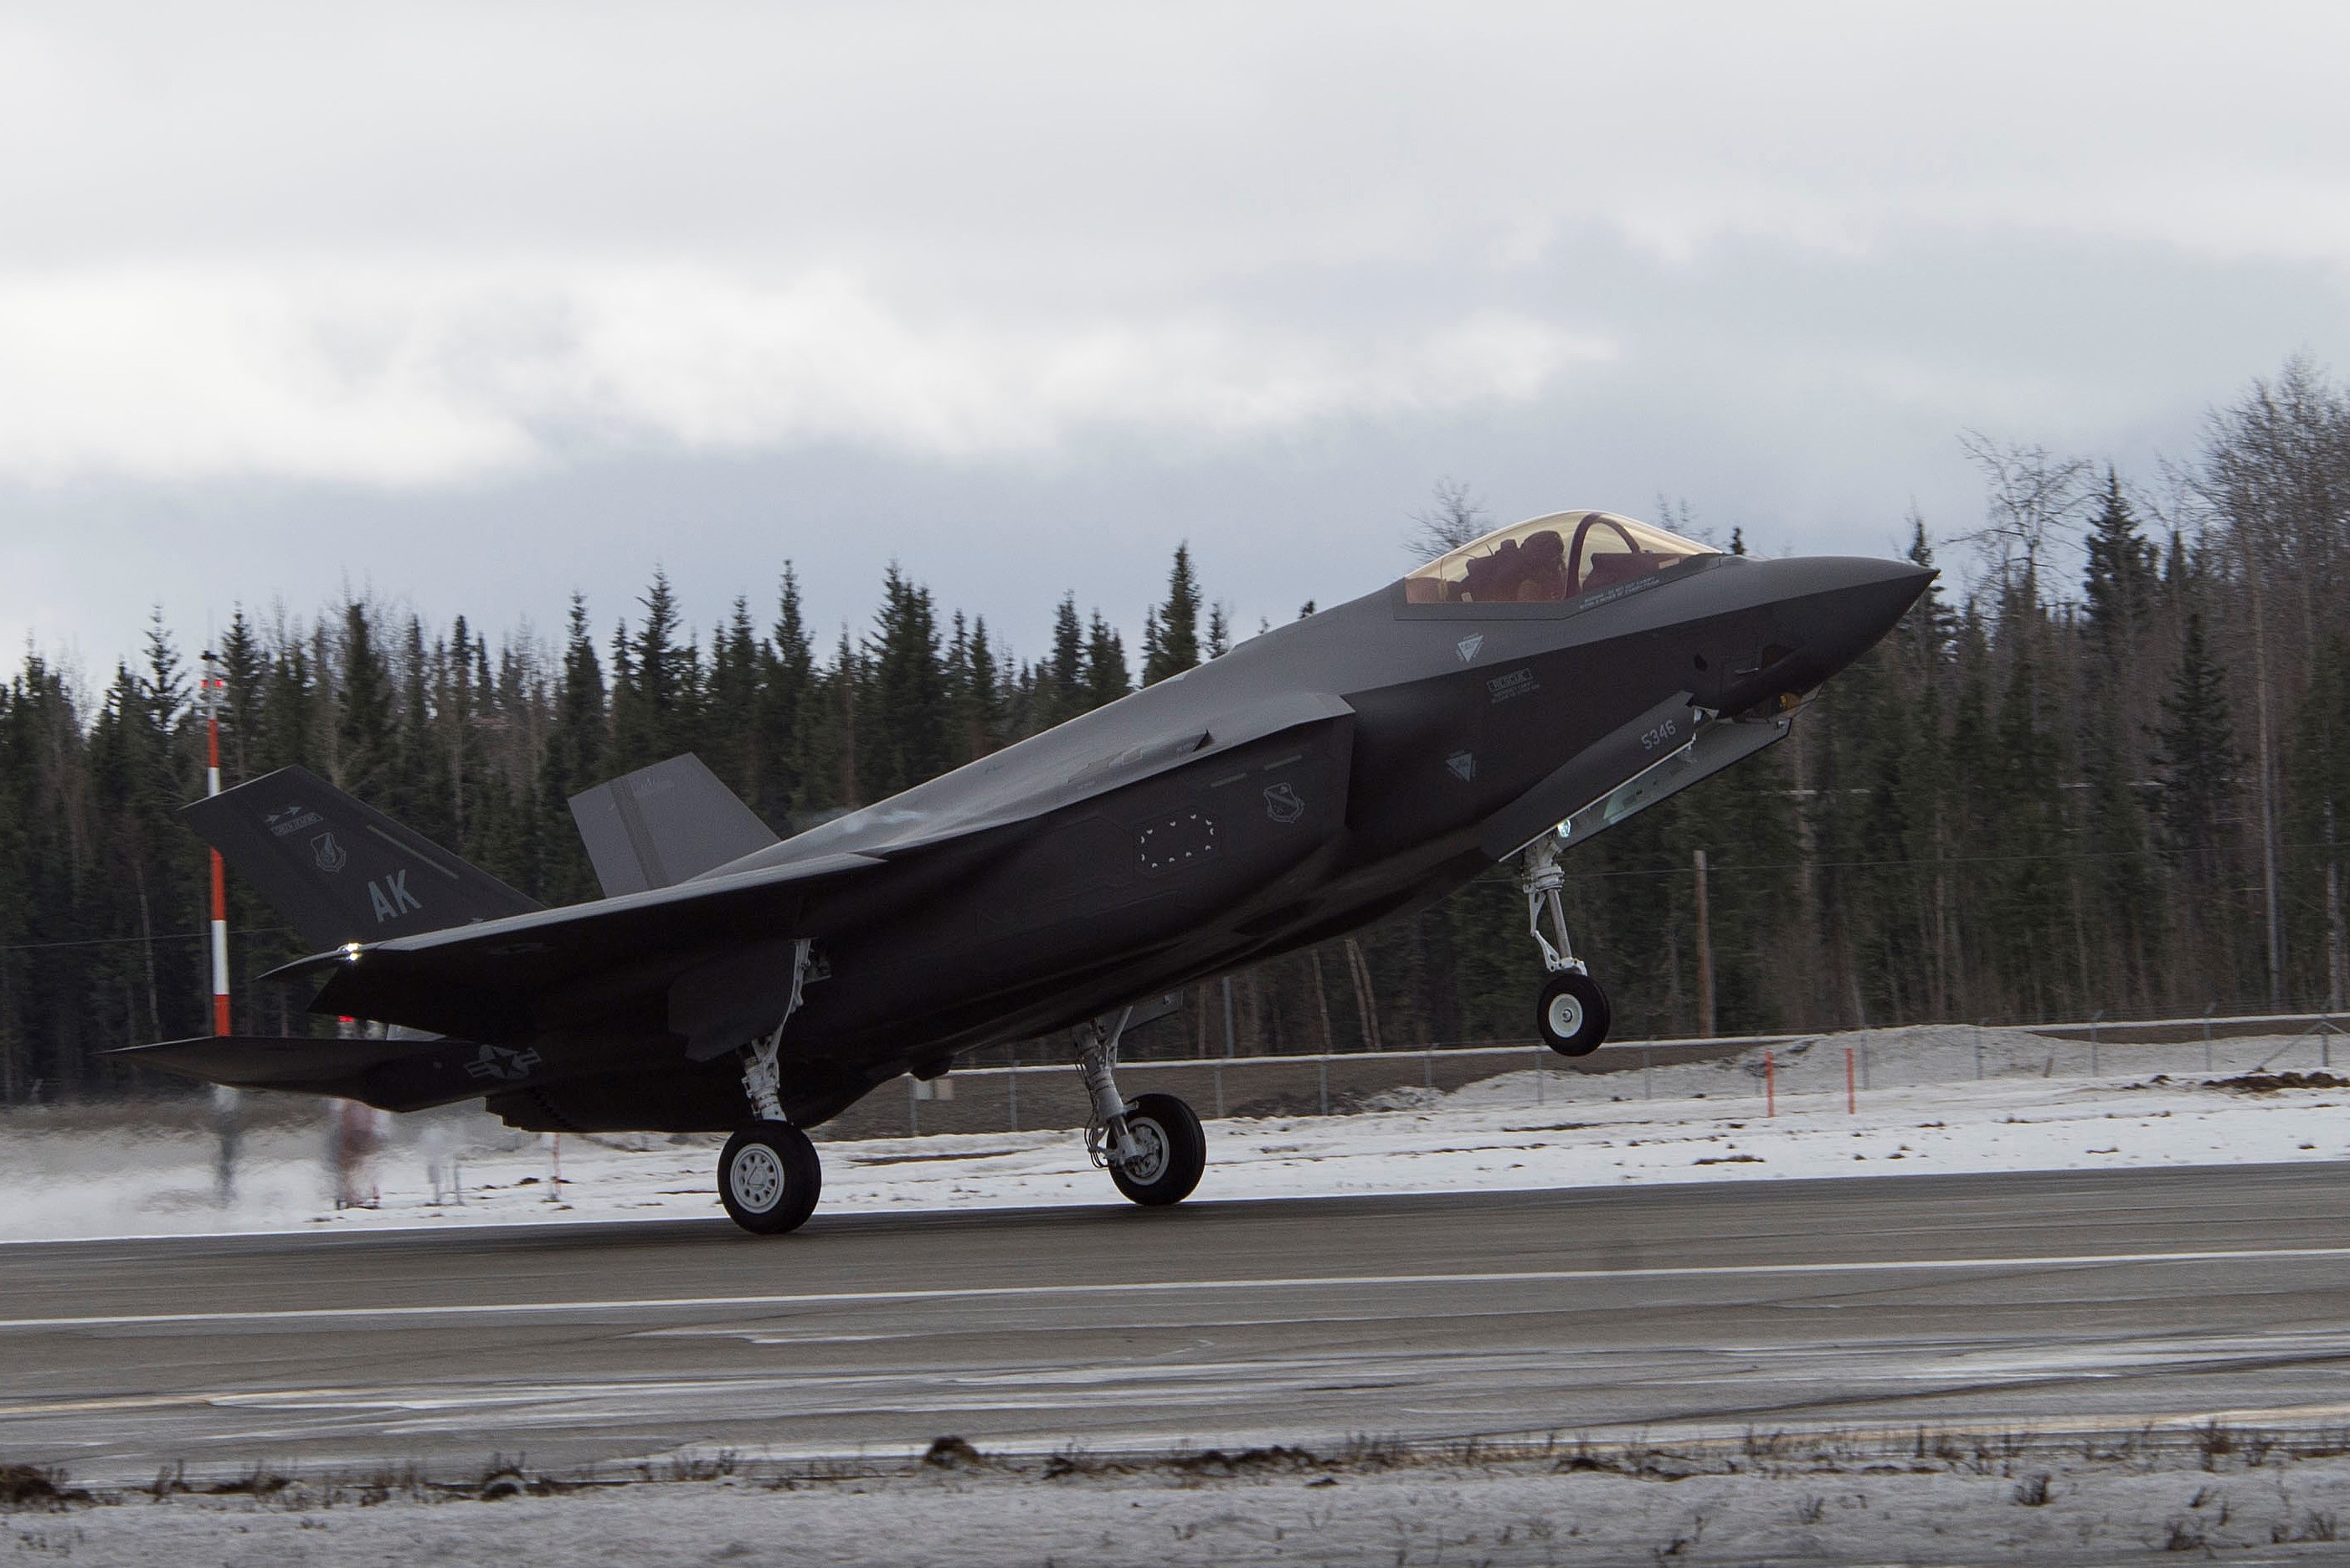 US Air Force Eielson Air Force Base Welcomes F-35A Lightning II